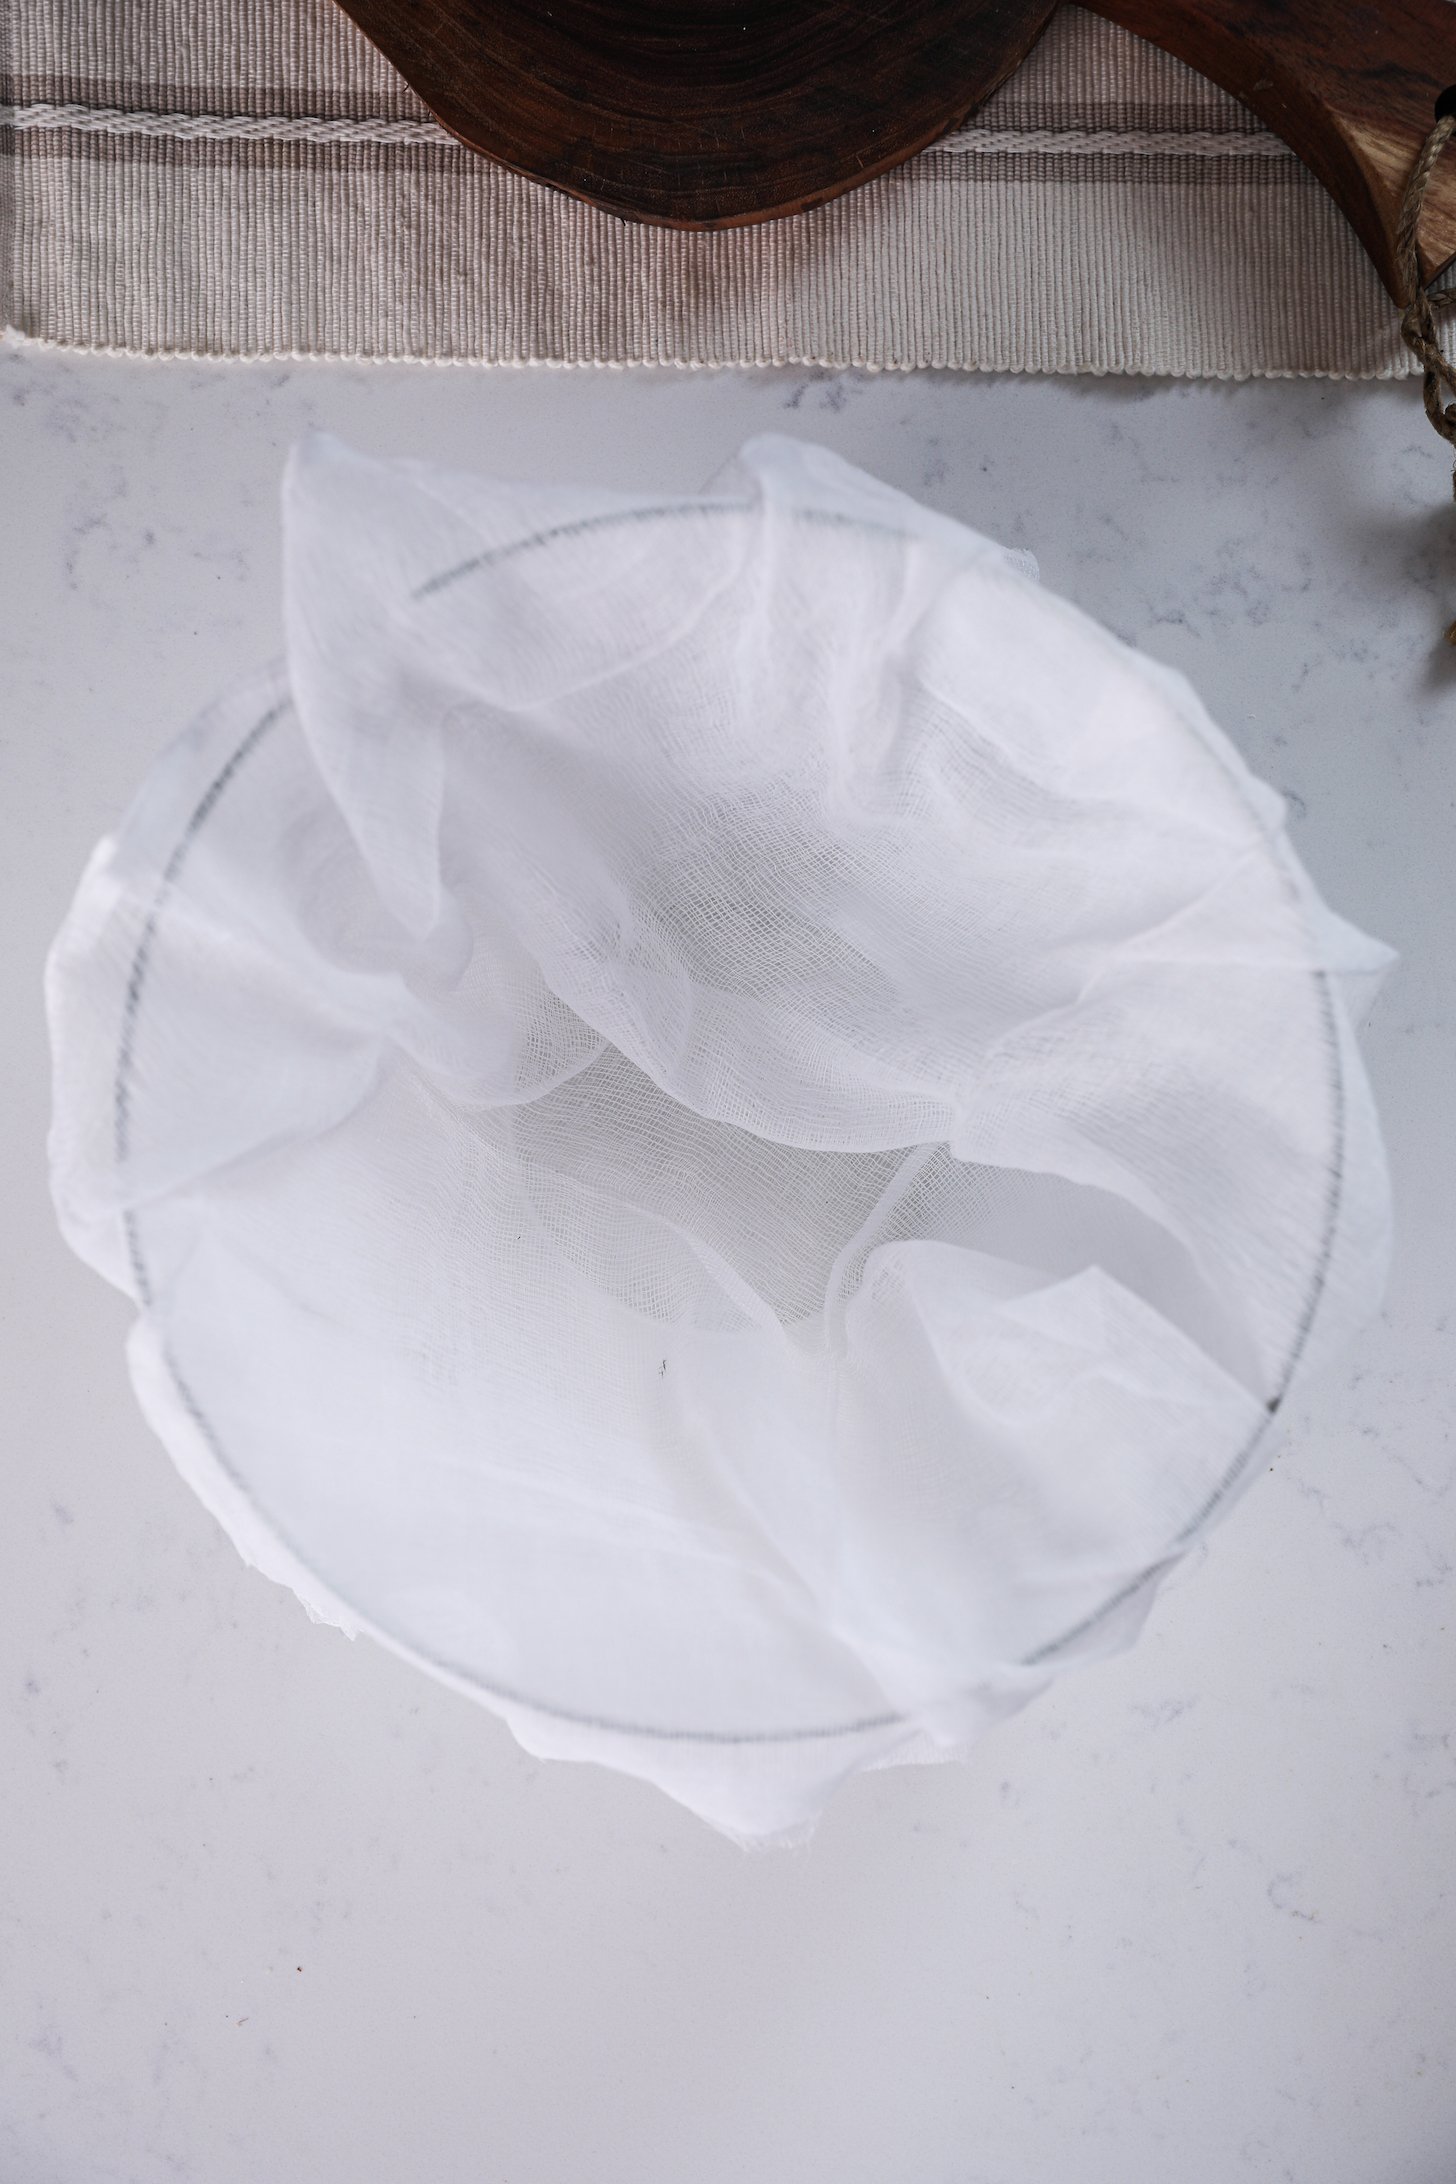 Overhead shot of a bowl lined with cheesecloth.